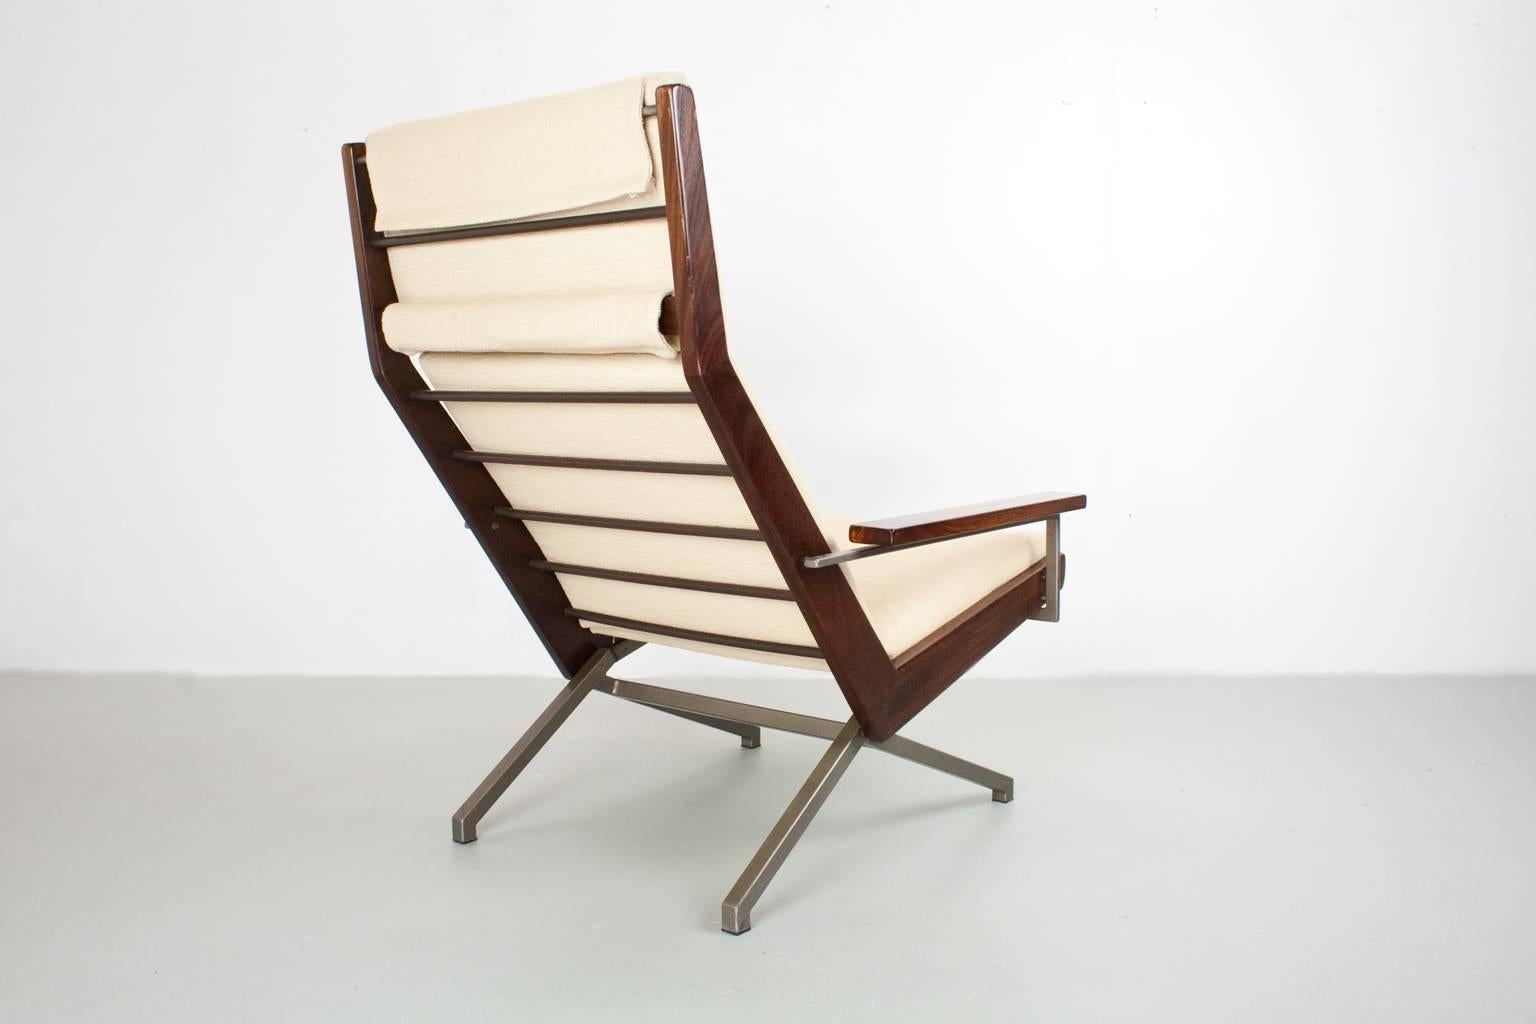 Original Robbert (Rob) Parry large Lotus lounge chair for Dutch furniture company Gelderland (collection 1950s-1960s) in teak wood and grey metal with new beige/ off white soft upholstery (De Ploeg-Korinthe) on a grey metal pyramide foot.

The